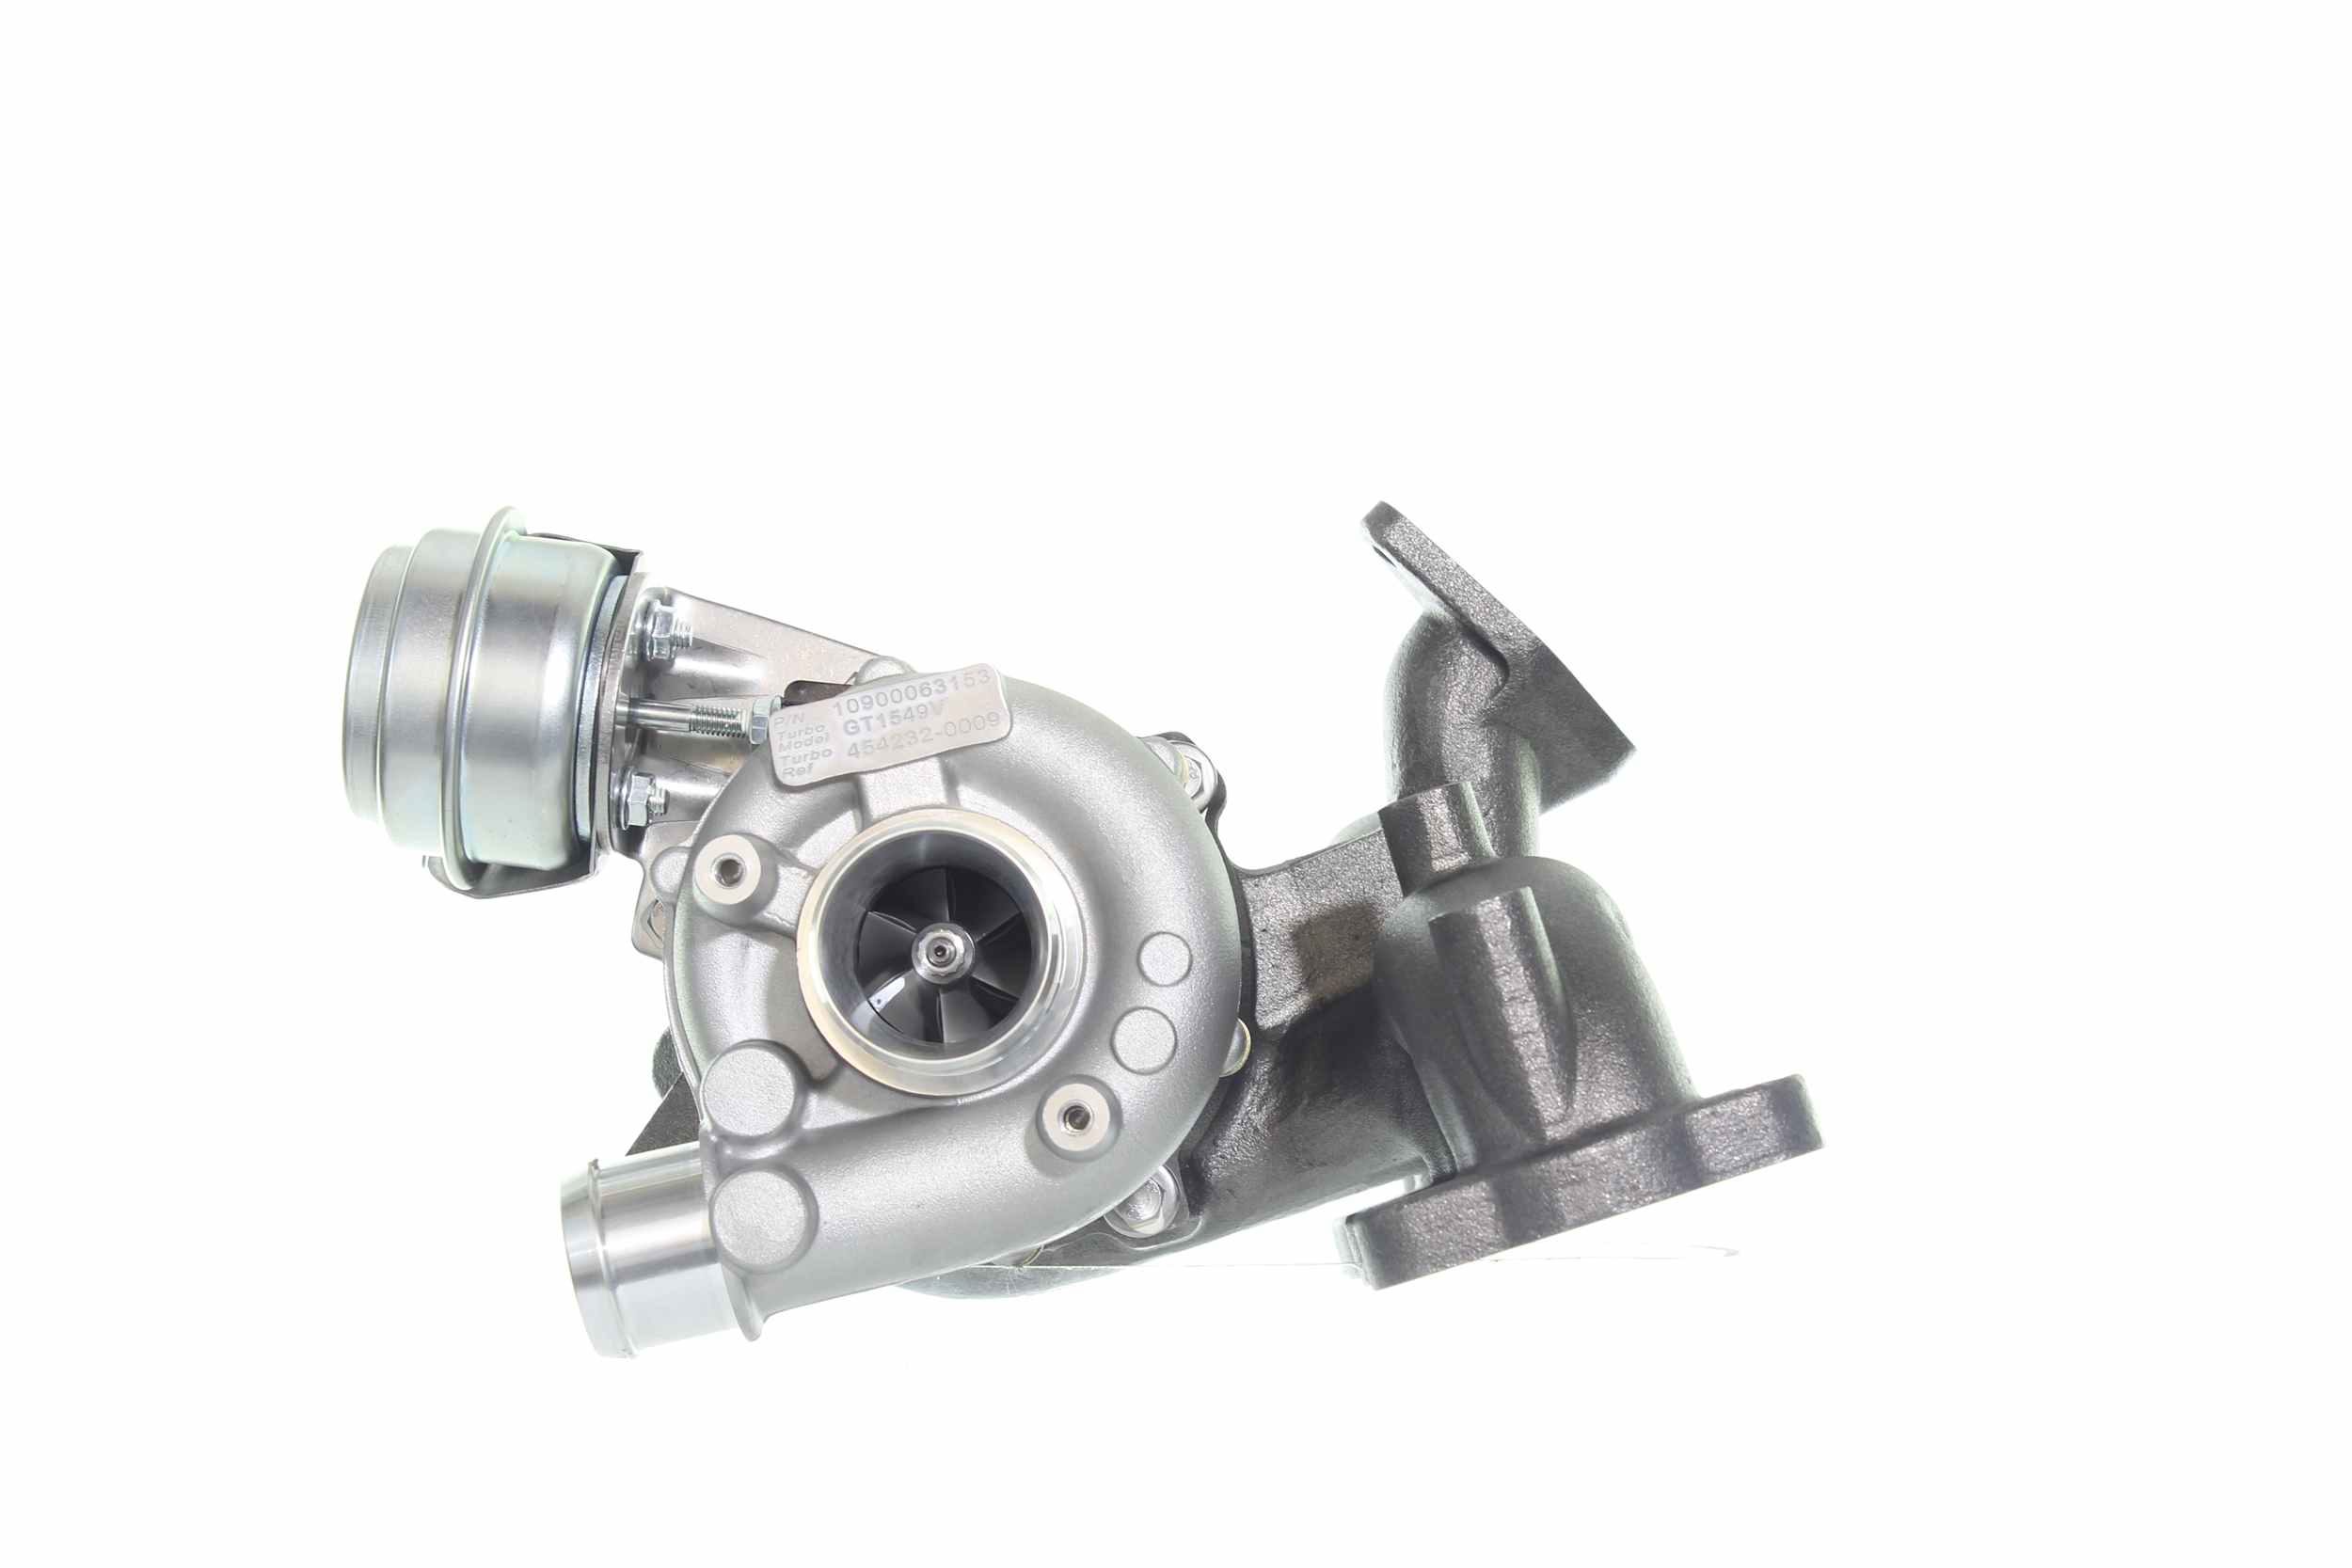 ALANKO 10900063 Turbocharger Exhaust Turbocharger, Incl. Gasket Set, with attachment material